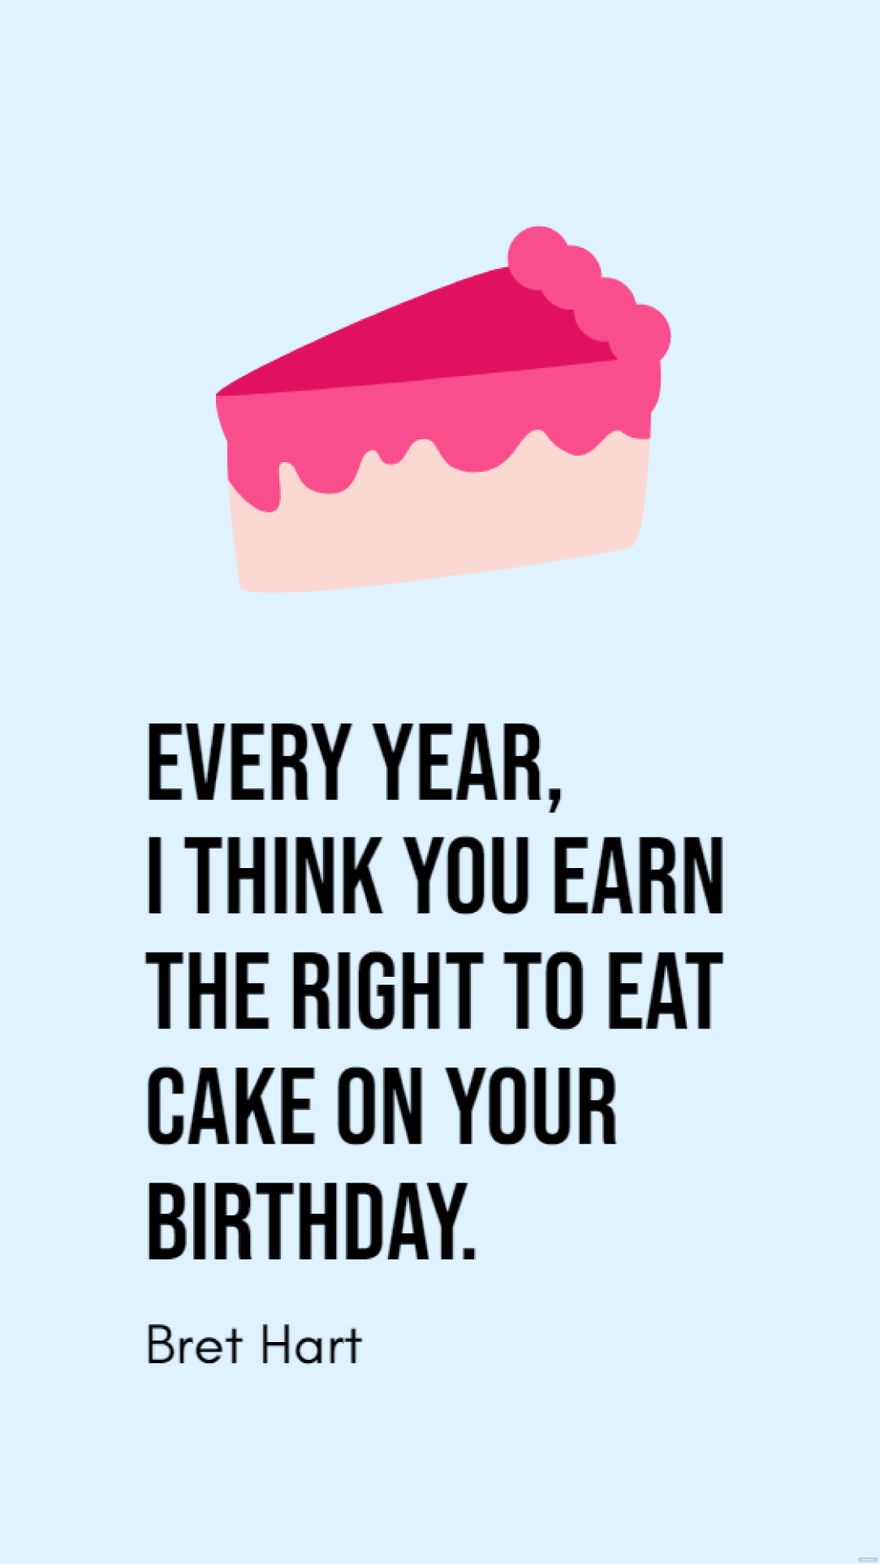 Bret Hart - Every year, I think you earn the right to eat cake on your birthday. in JPG